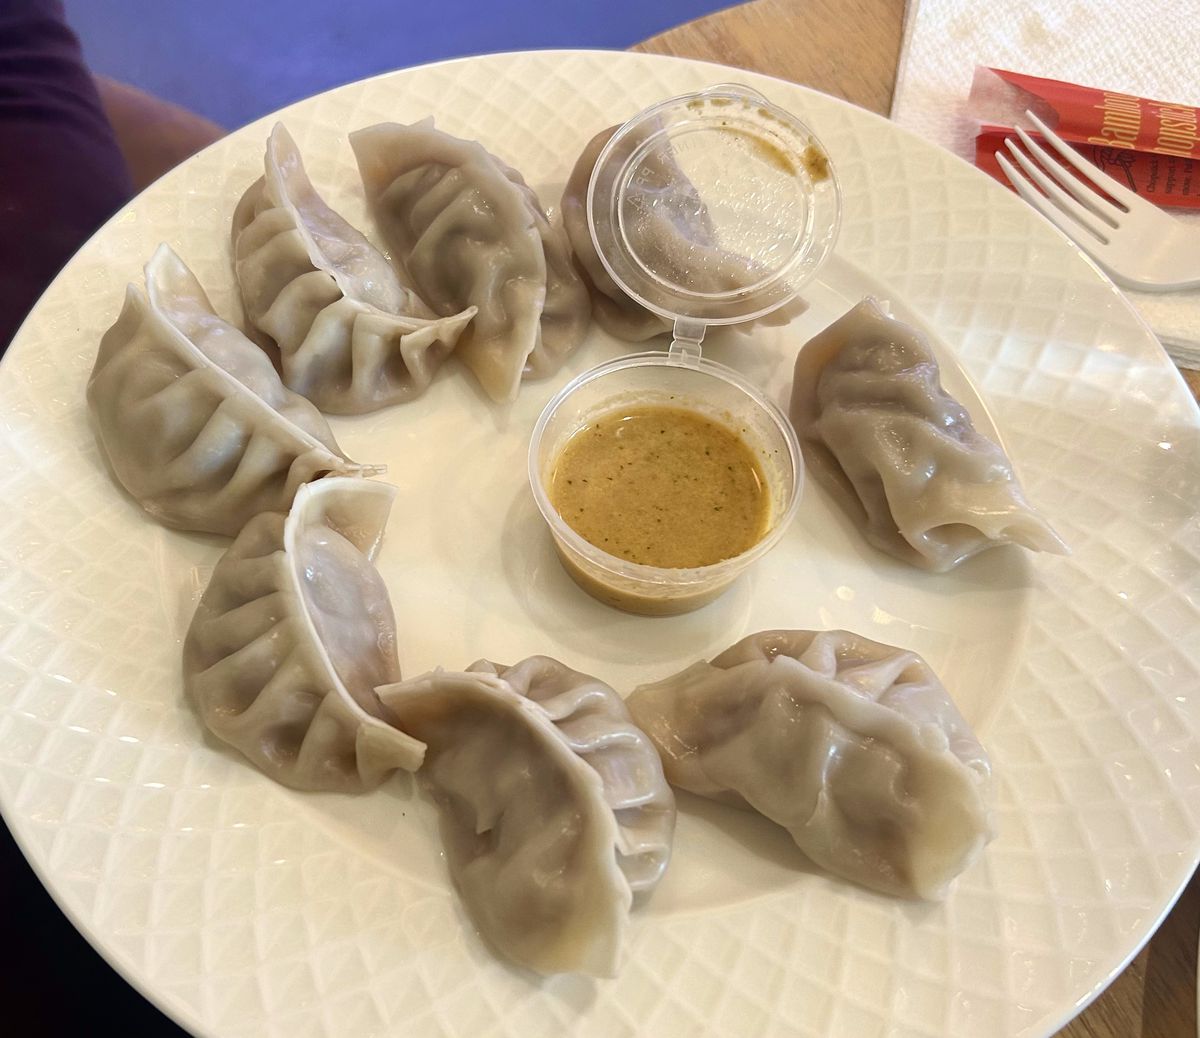 Eight momos arranged on a plate around a dipping sauce.